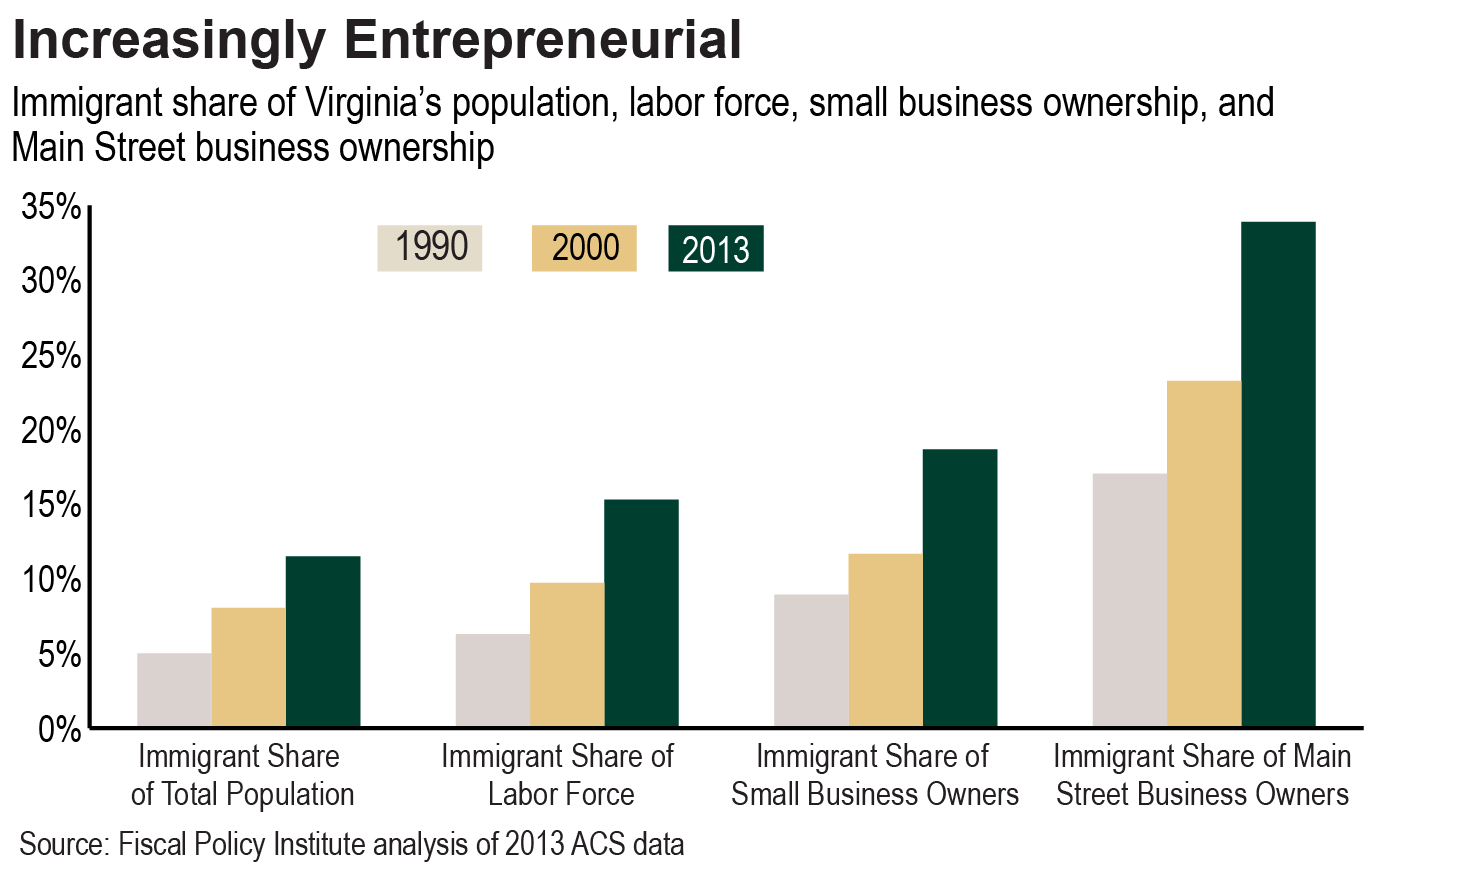 Bar graphs showing the immigrant share of Virginia's population, labor force, small business ownership, and Main Street business ownership in 1990, 2000, and 2013. Virginia's immigrant population is increasingly entrepreneurial based on Fiscal Policy Institute analysis of 2013 ACS data